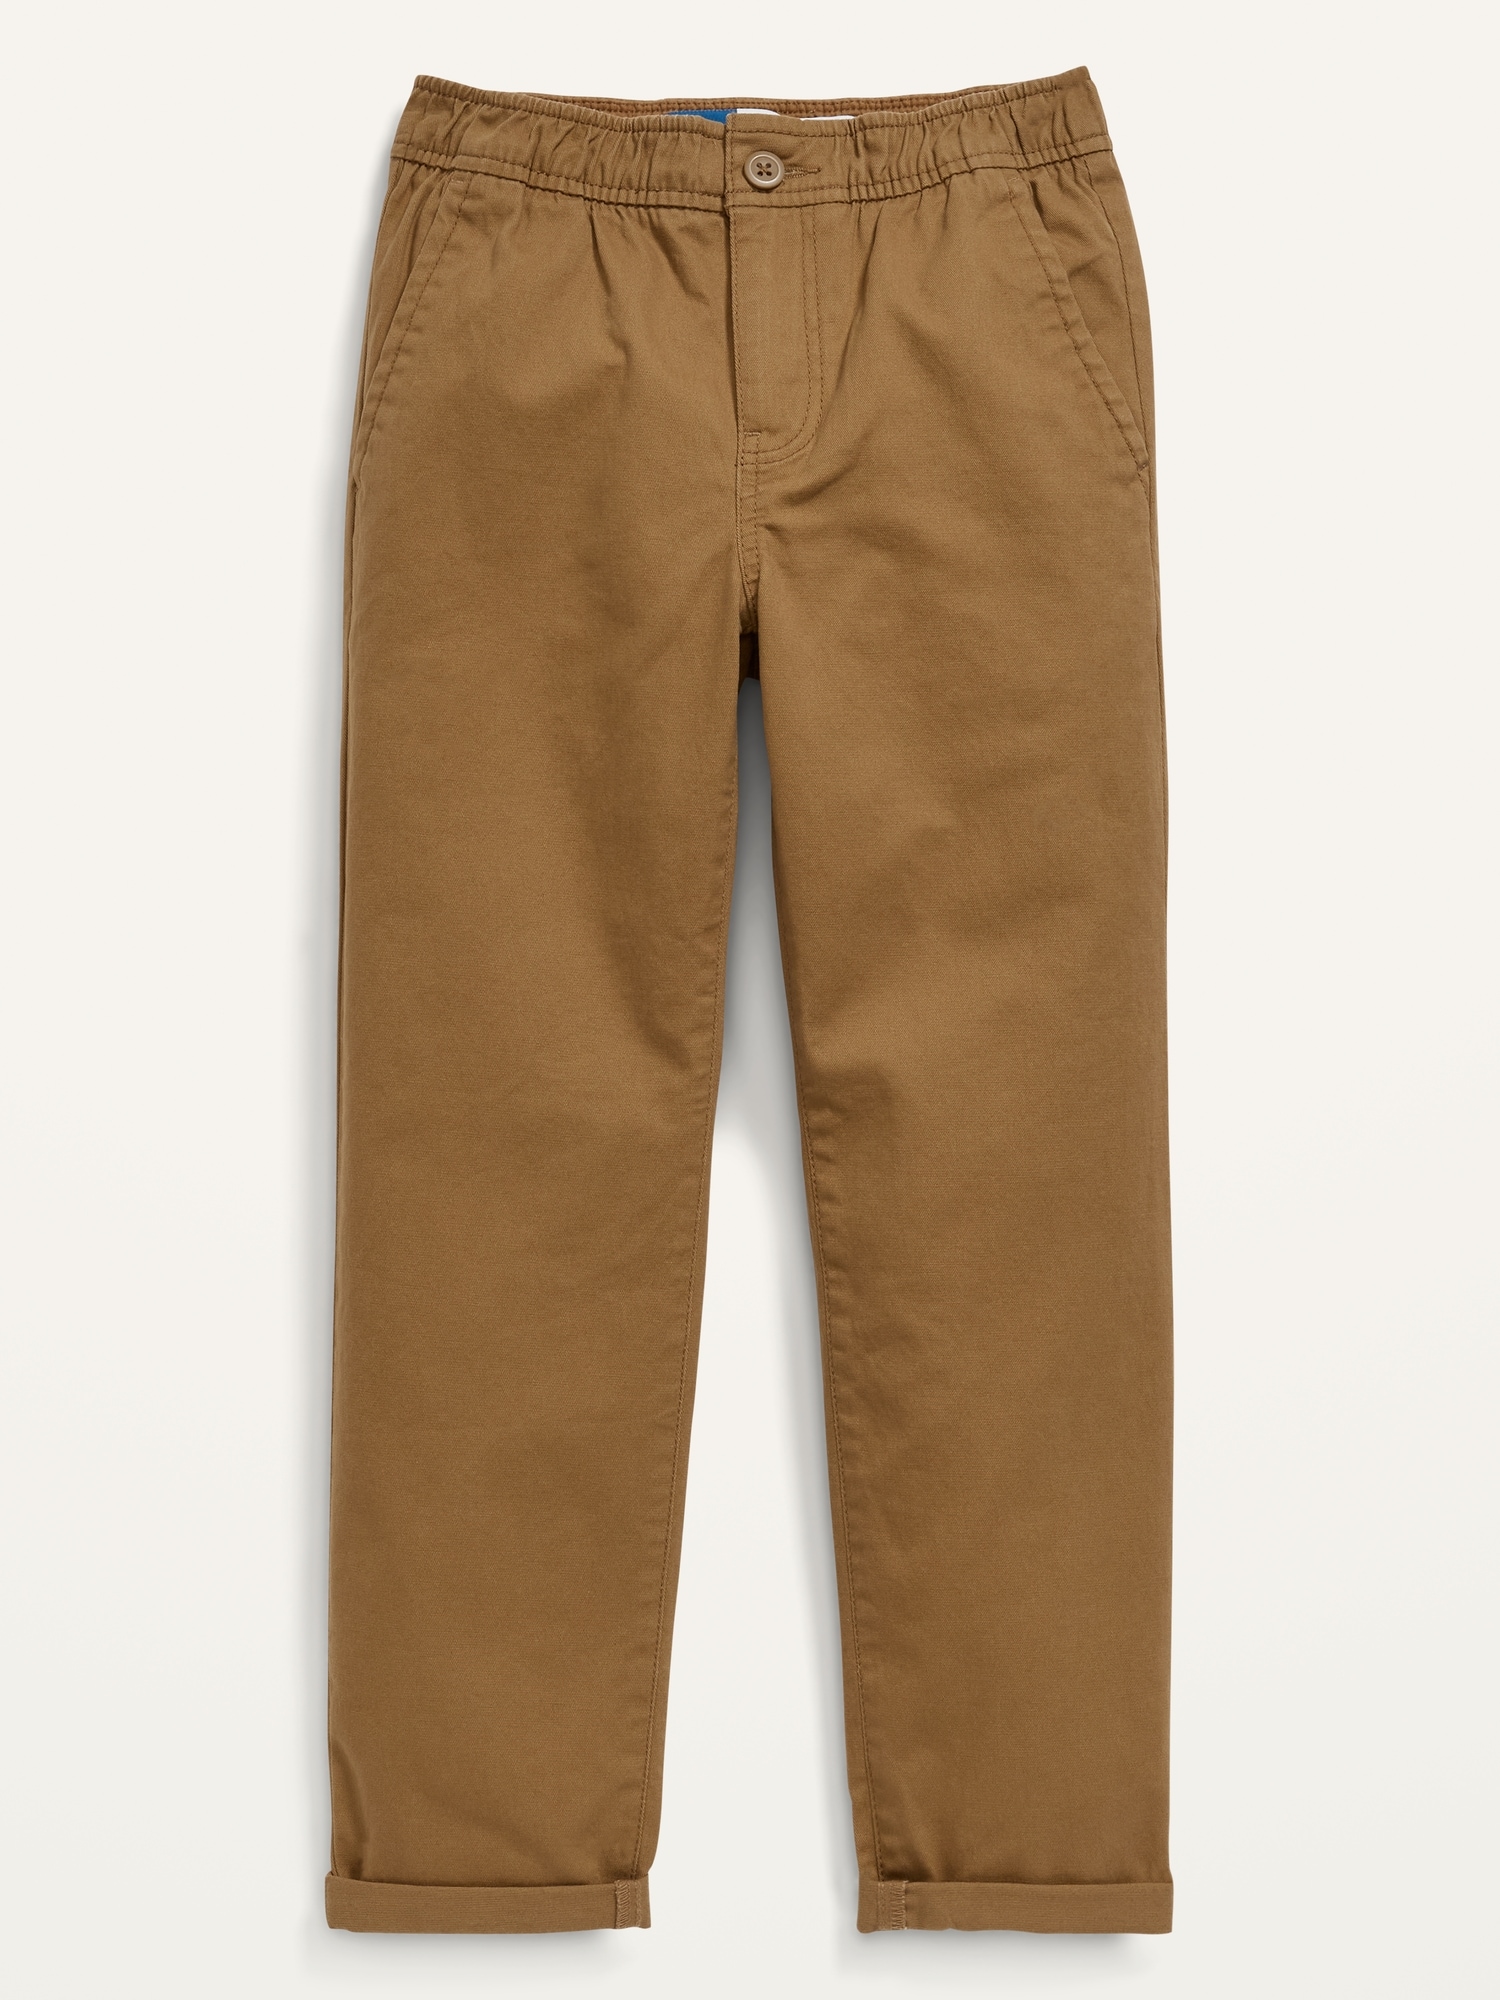 Old Navy OGC Chino Built-In Flex Taper Pants for Boys brown. 1